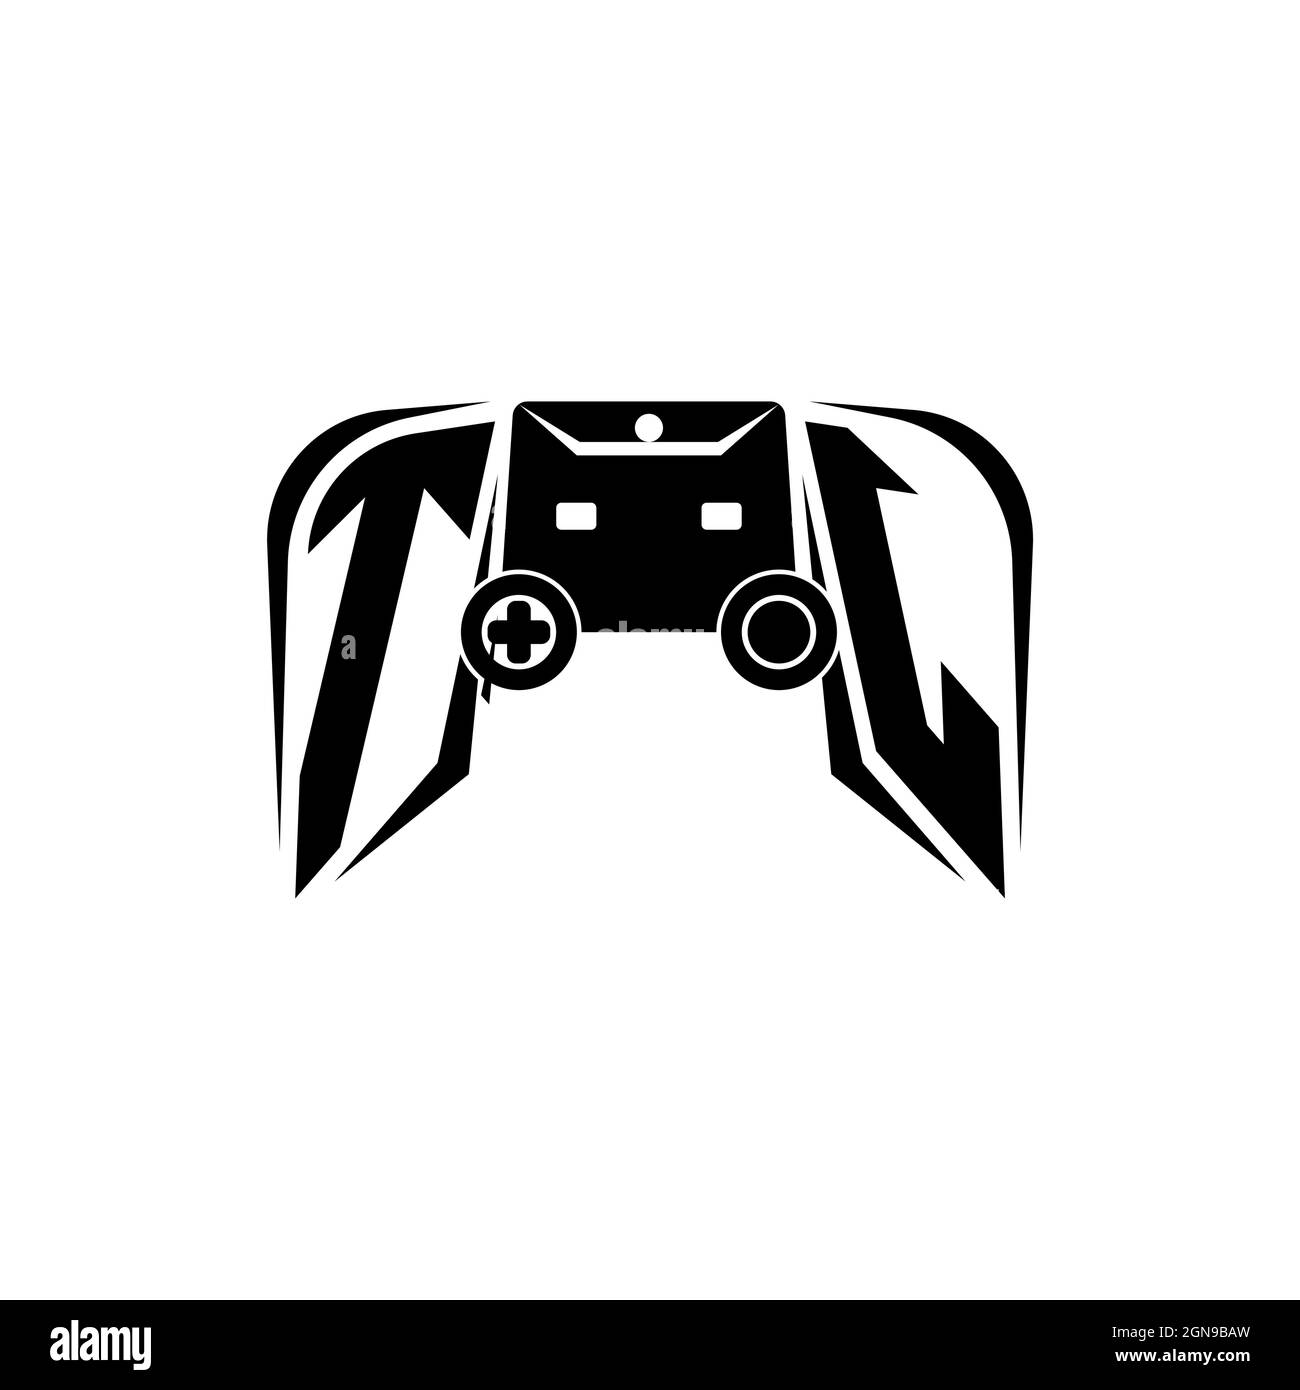 Game Station Logo Design Template Stock Vector (Royalty Free) 2191681323